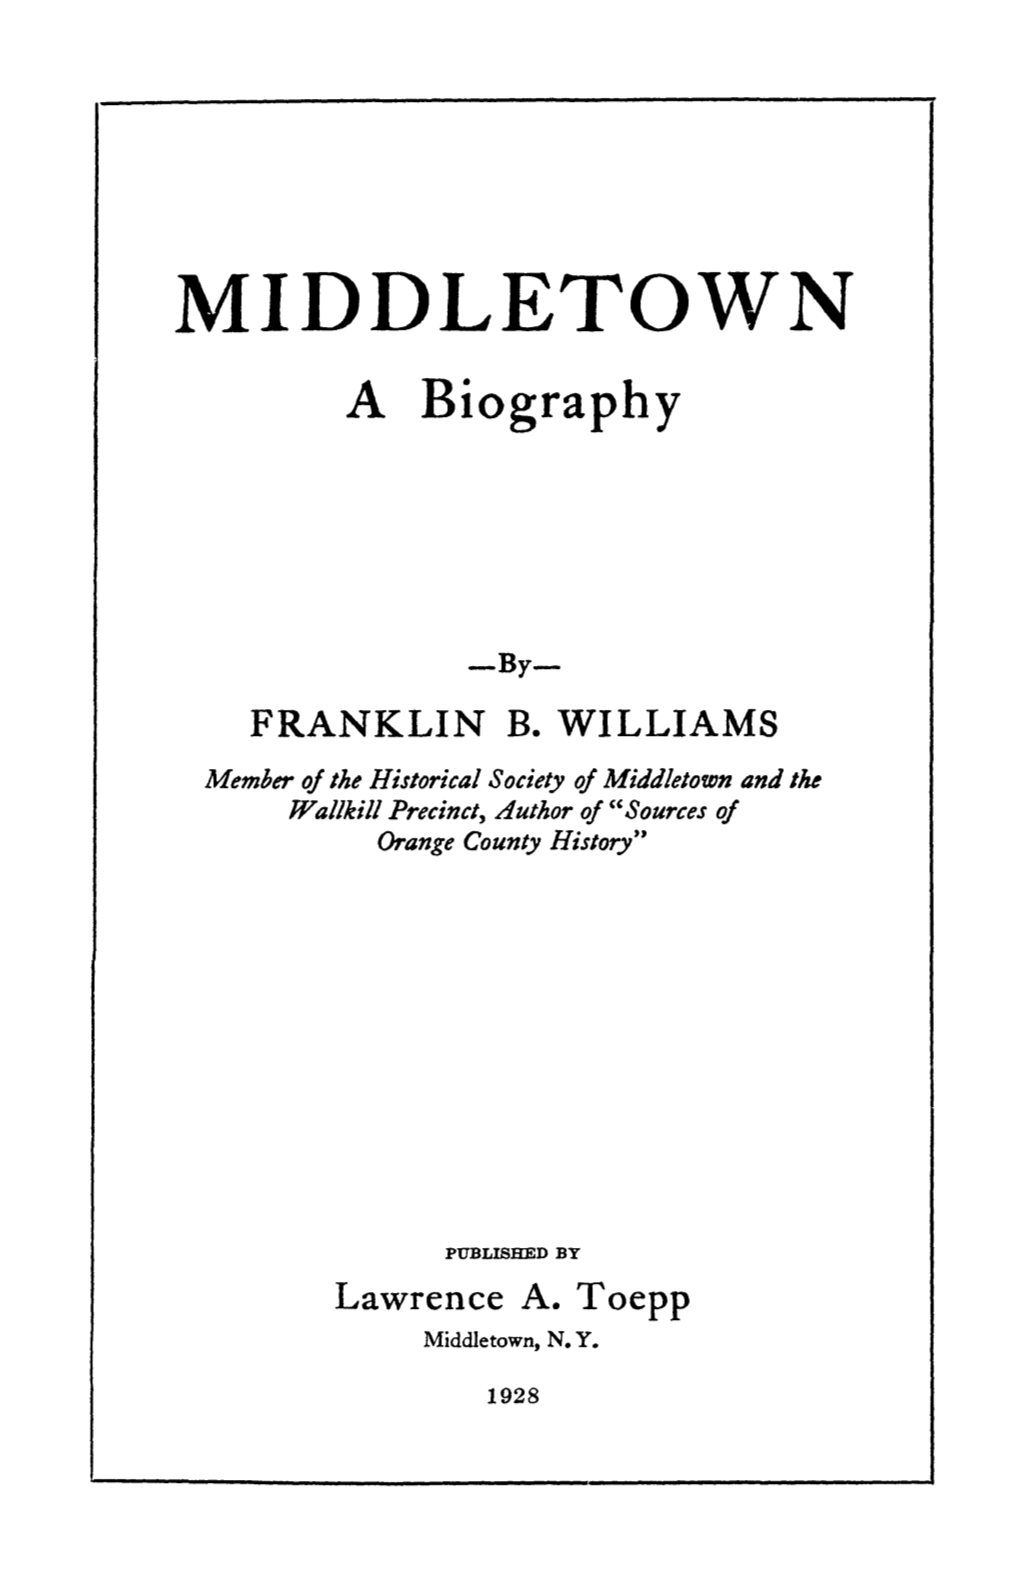 MIDDLETOWN a Biography